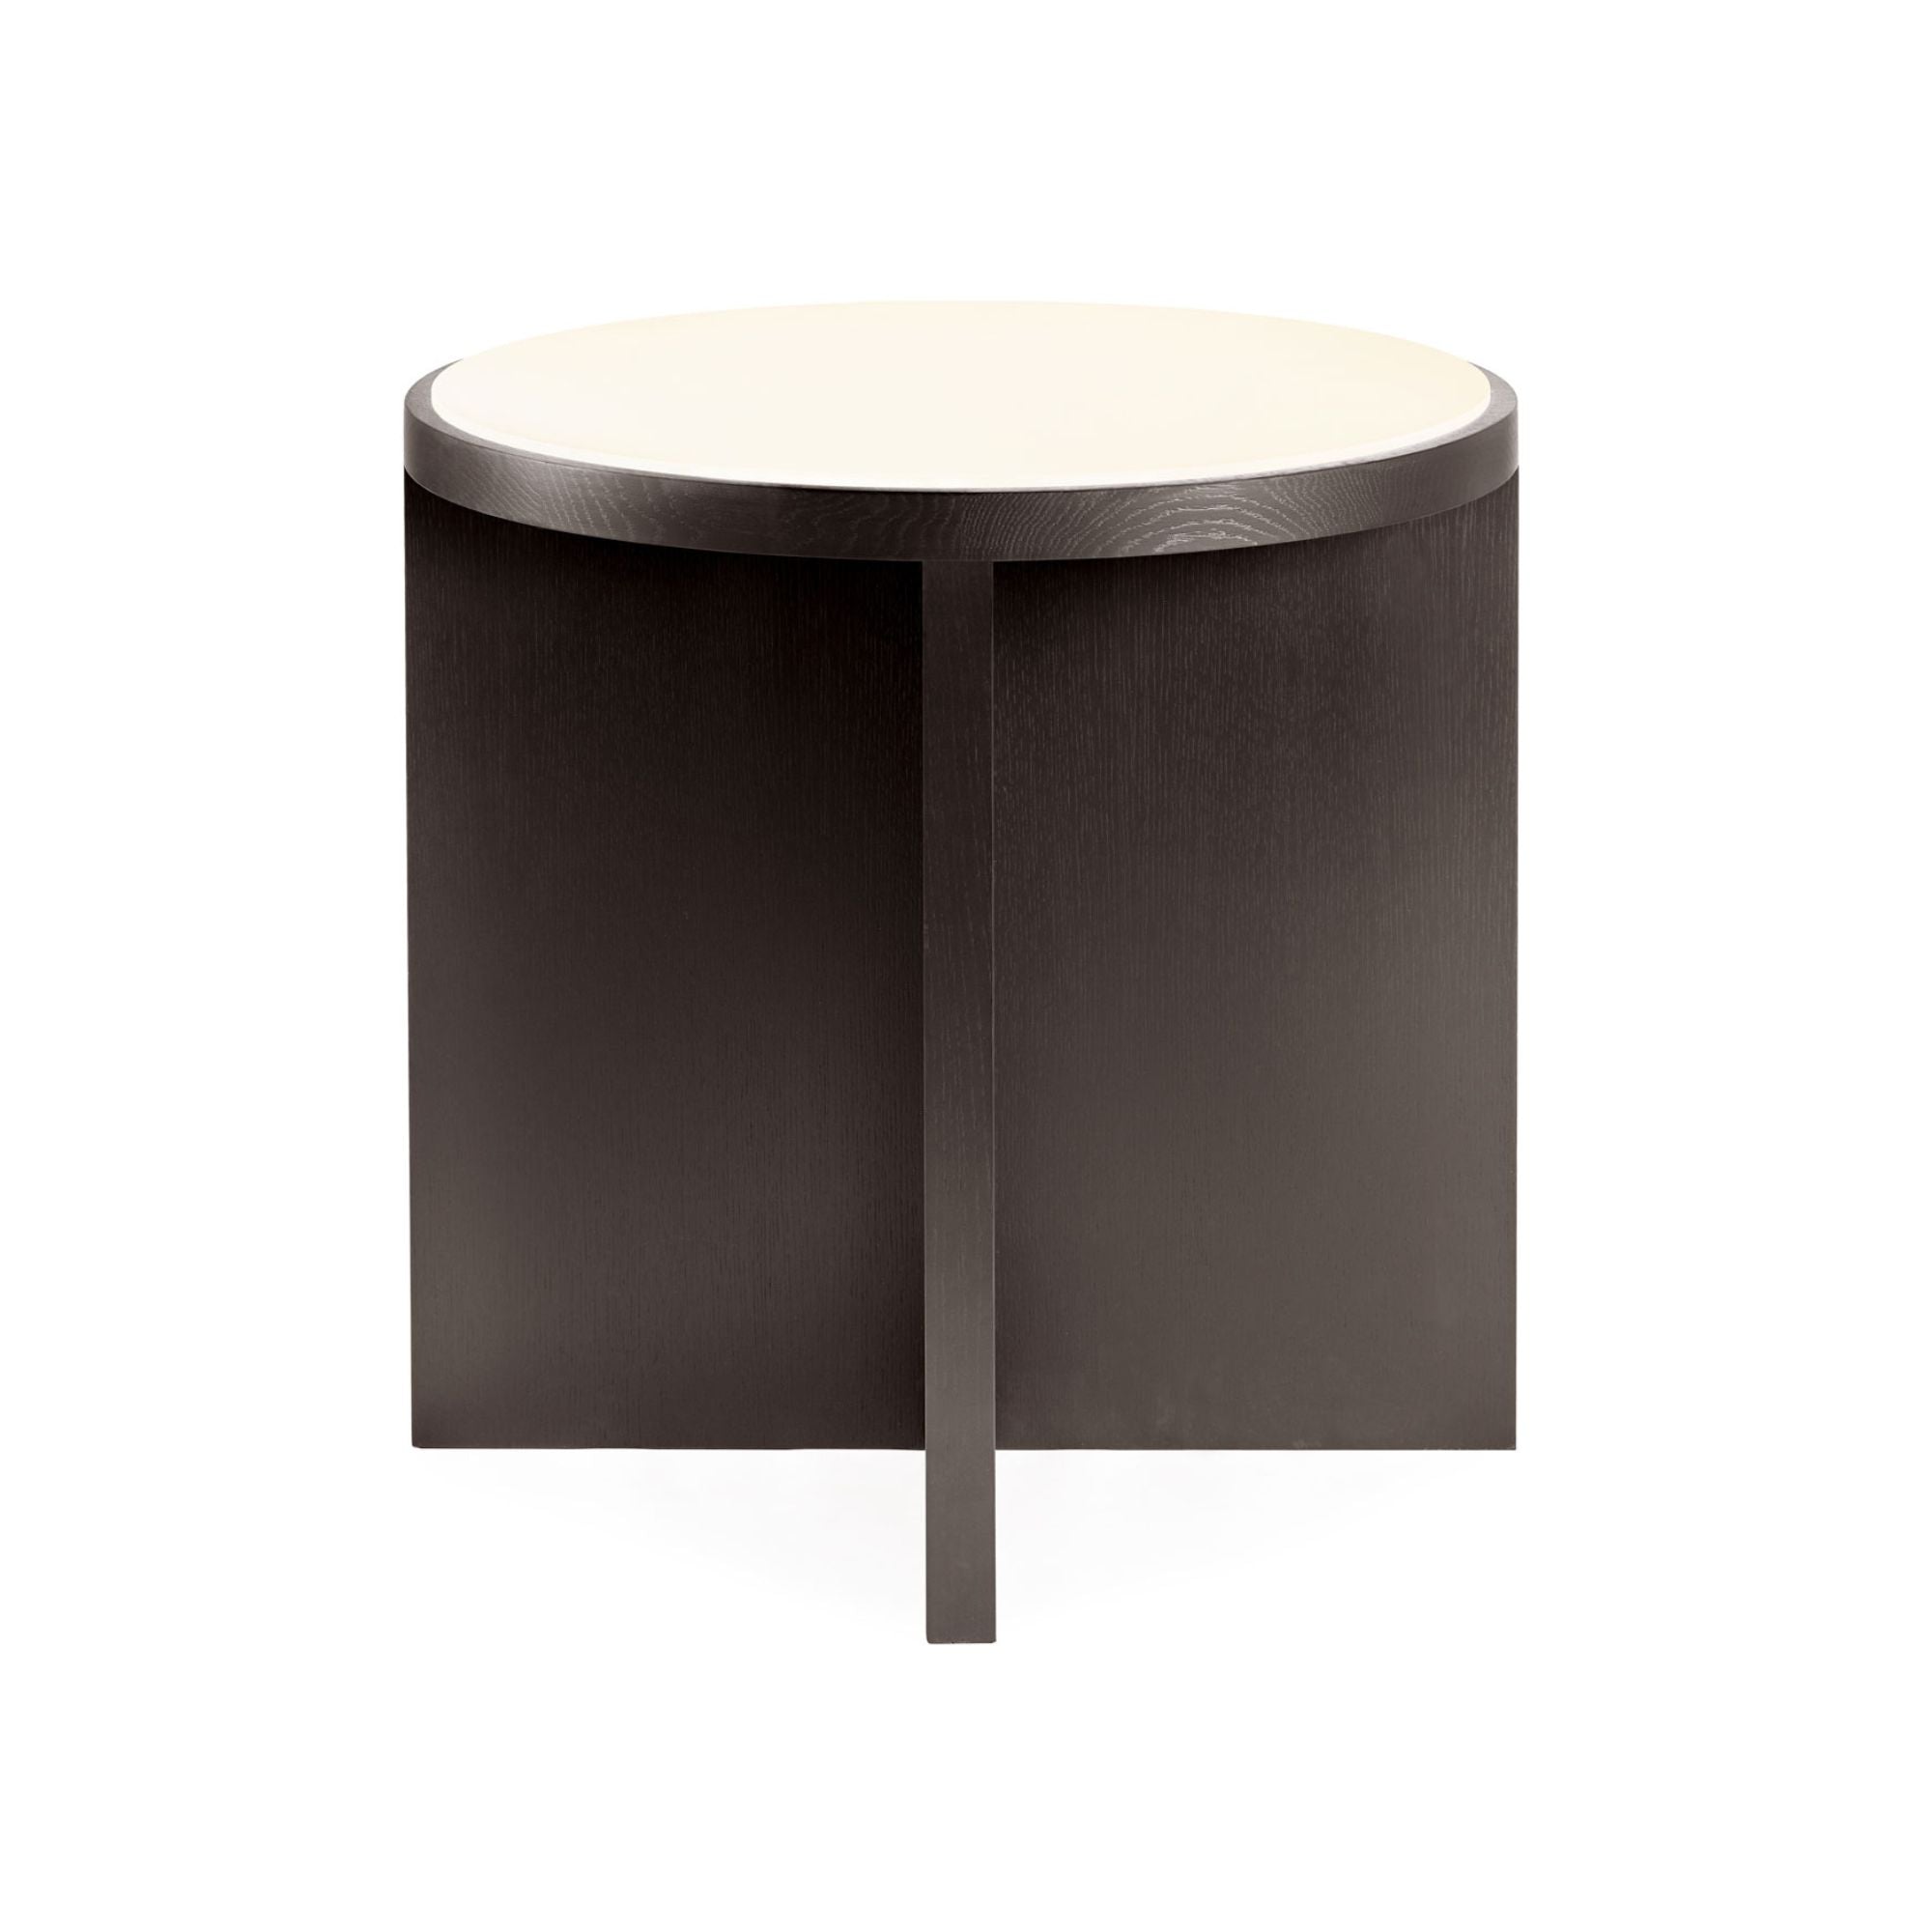 Cici S Dining Table